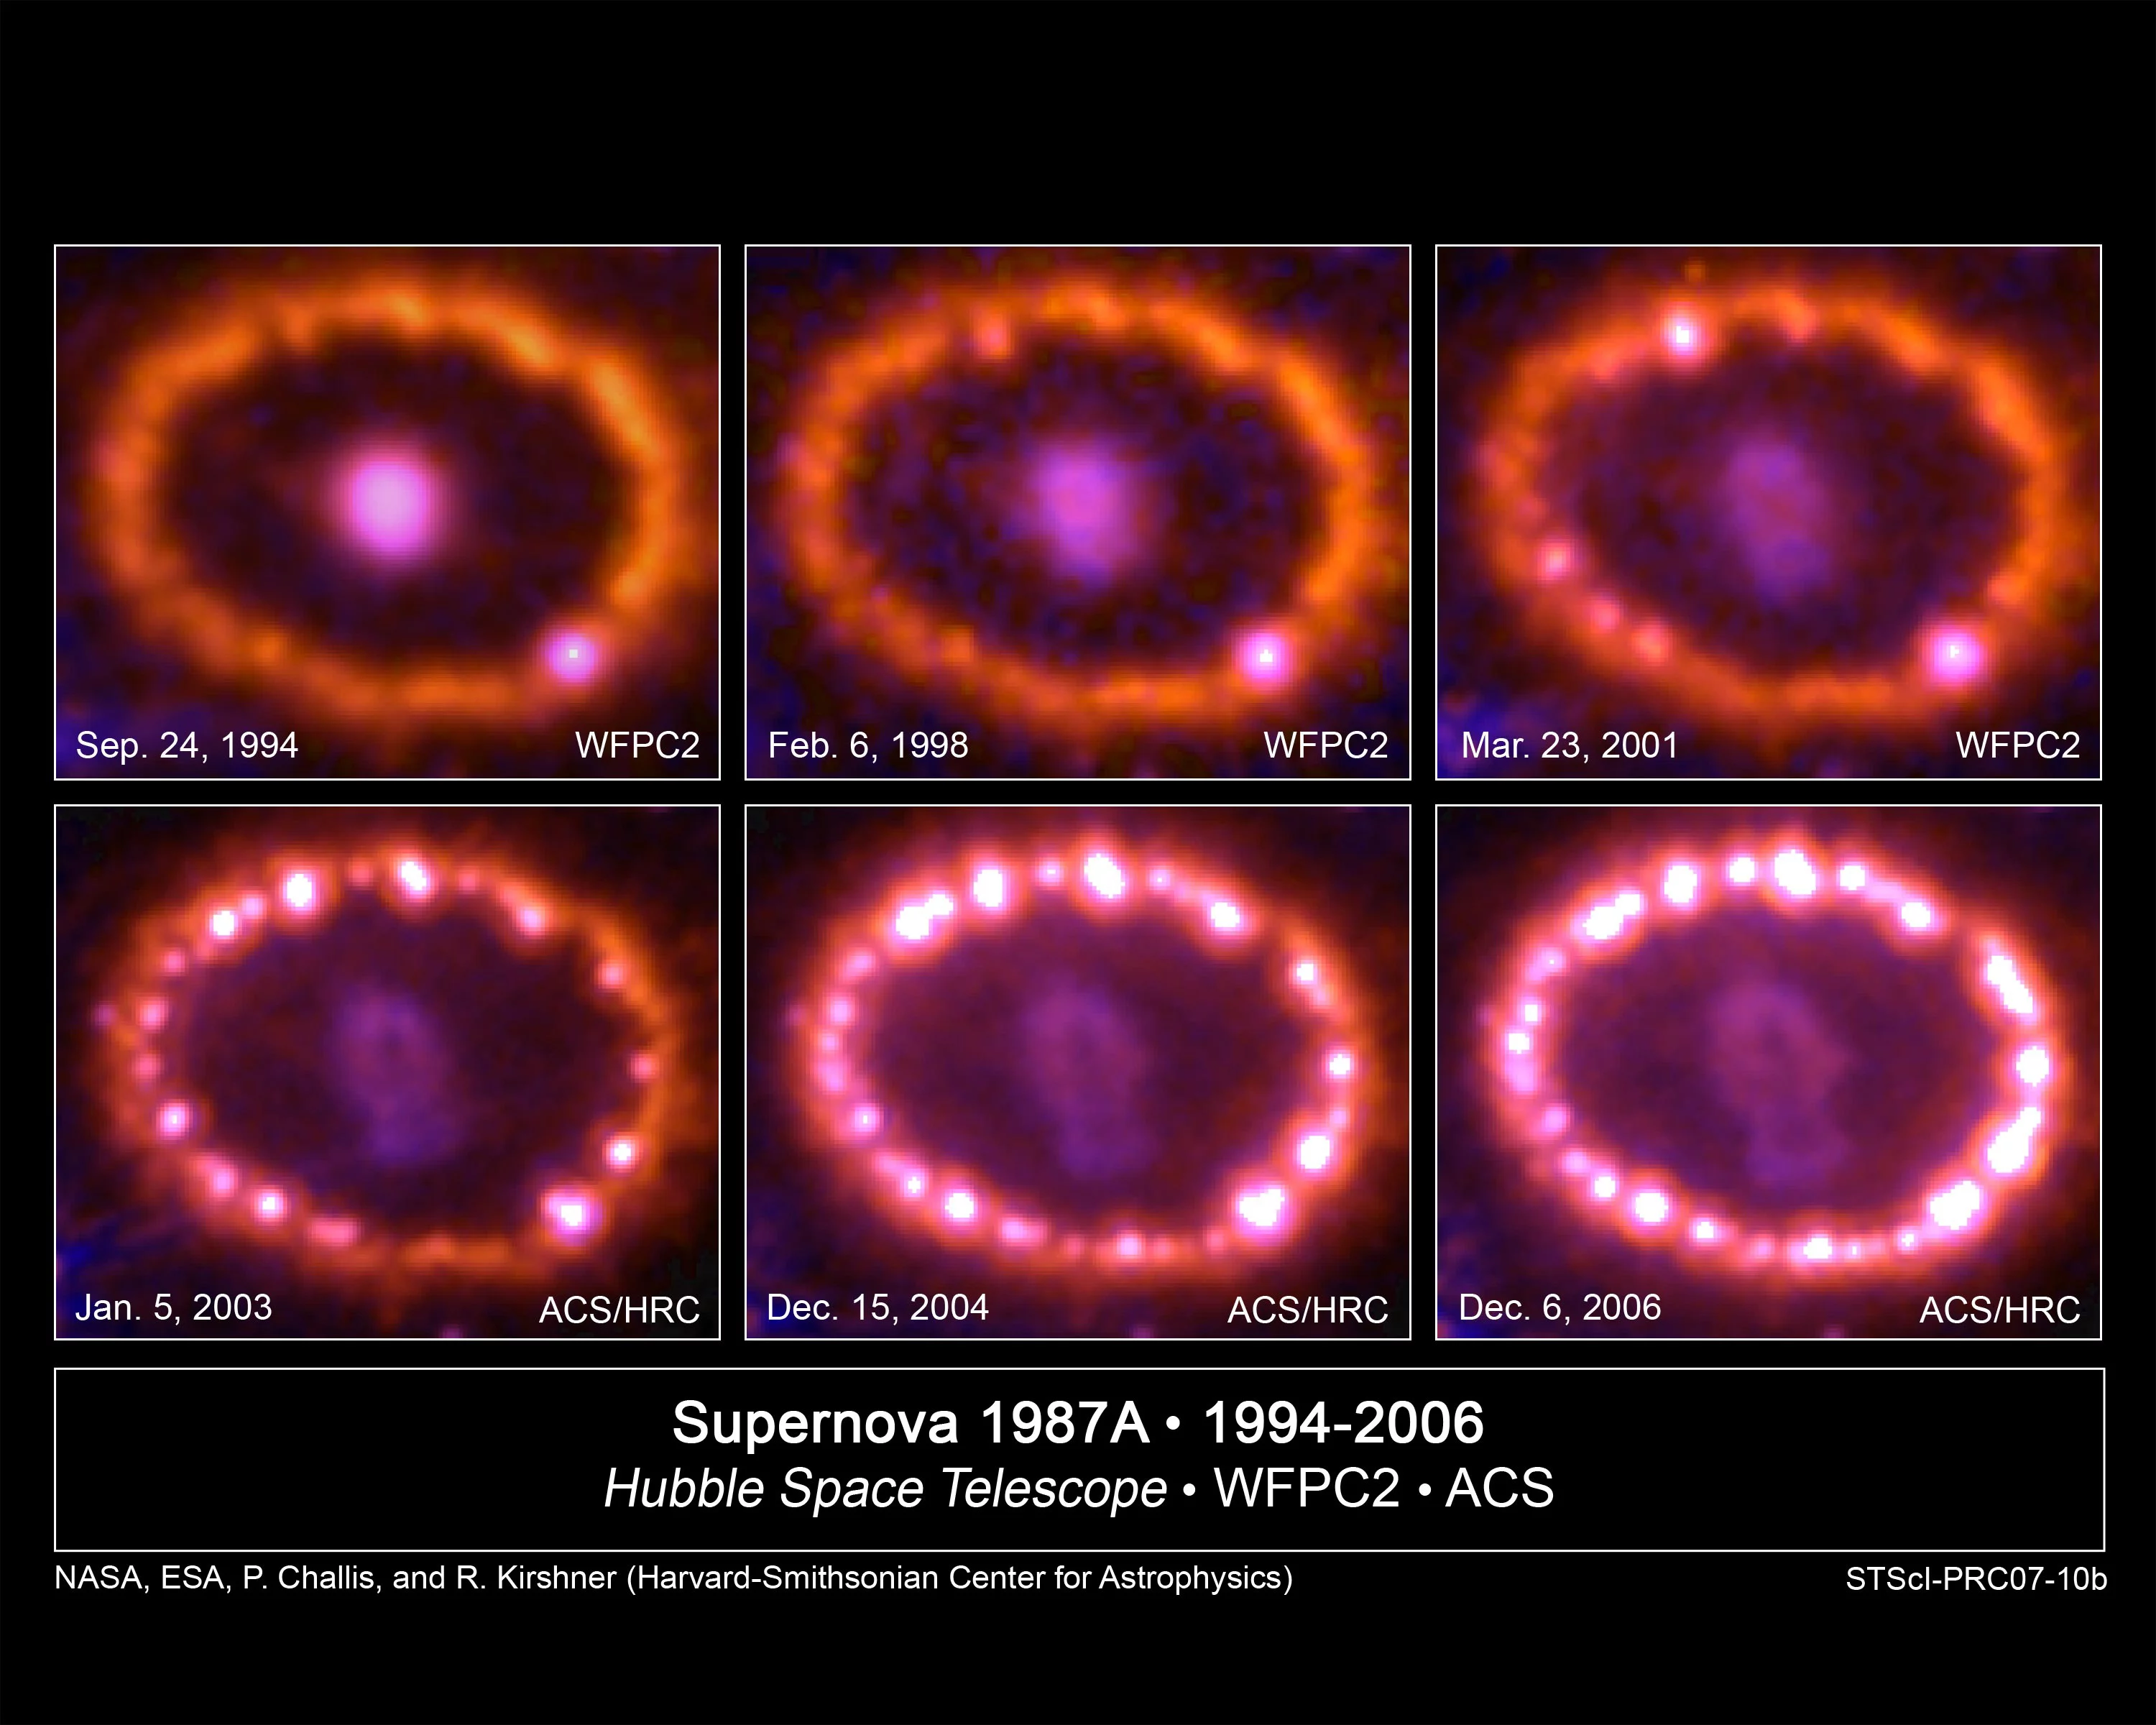 Supernova 1987 A in the first years after the explosion. The glowing astral debris is heated in the middle, primarily by Ti-44.  Source: NASA, ESA, P. Challis and R. Kirshner (Harvard-Smithsonian Center for Astrophysics)